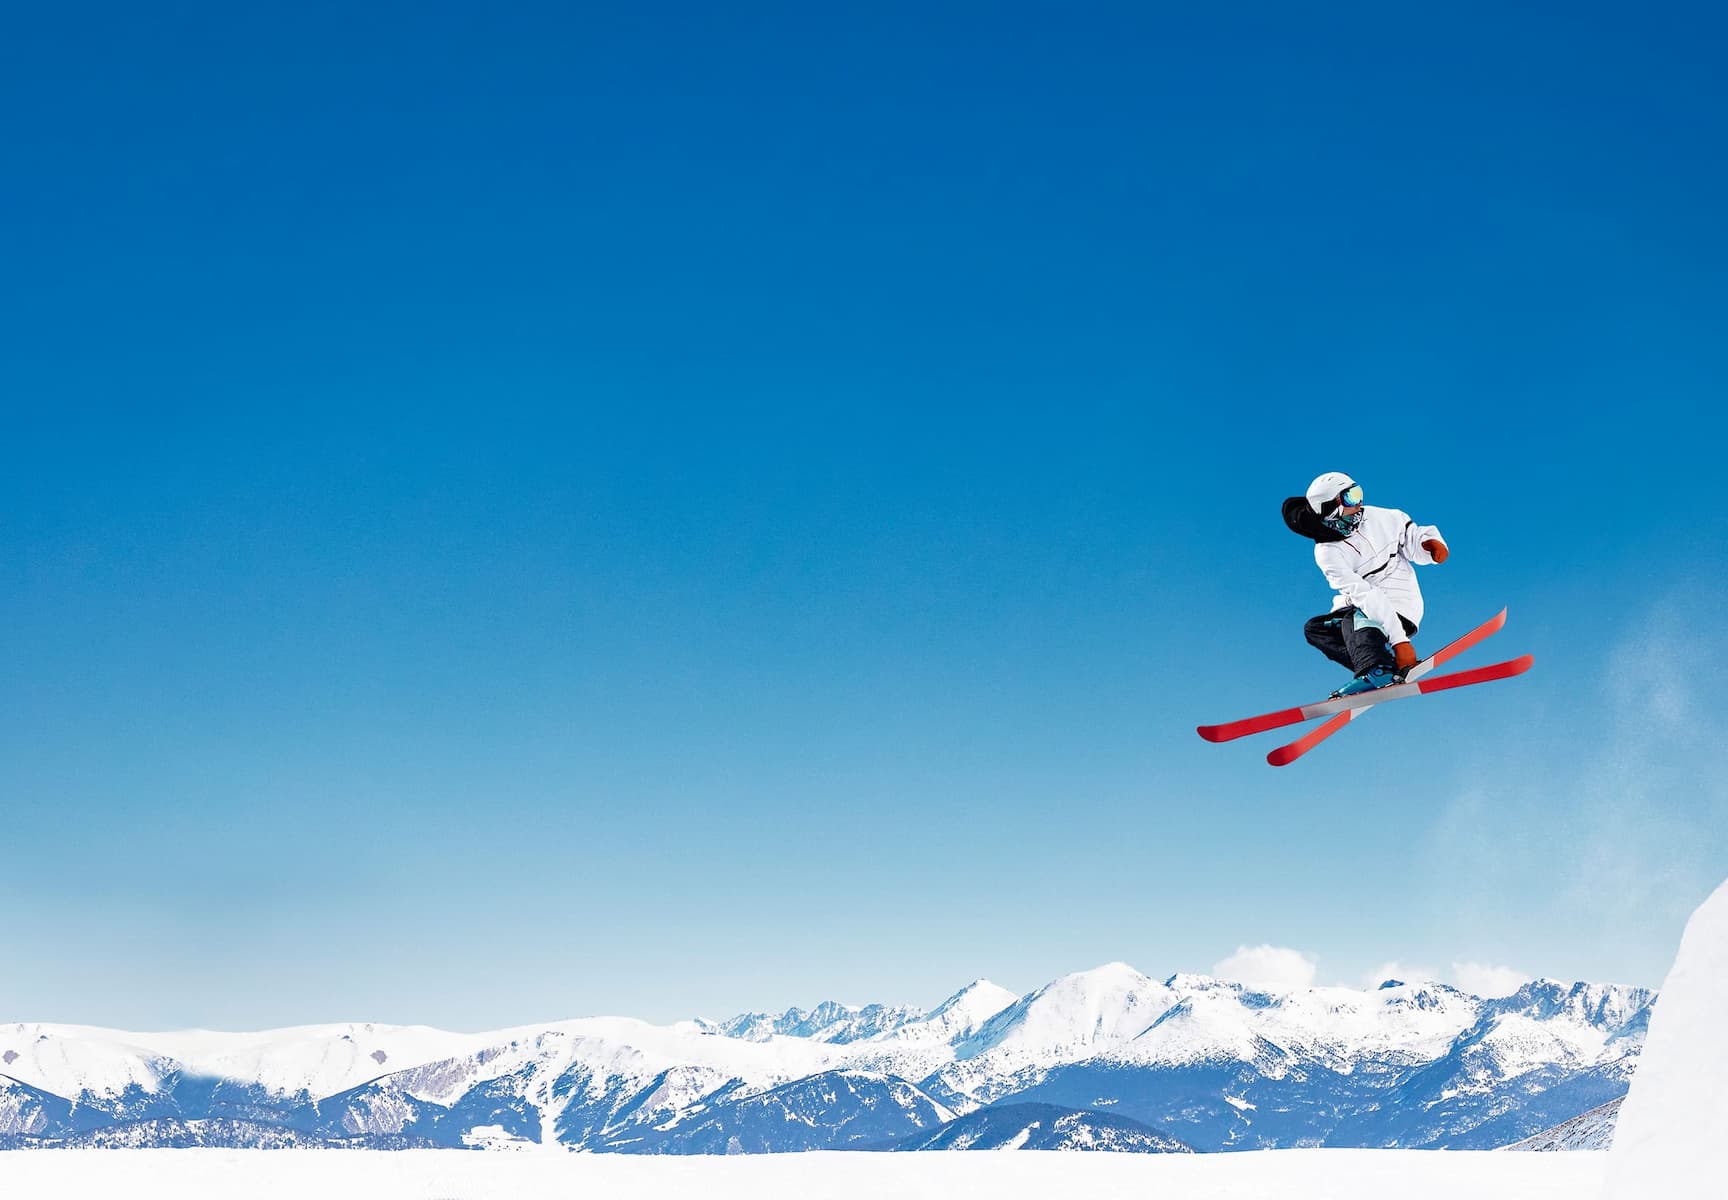 Skier leaping in air